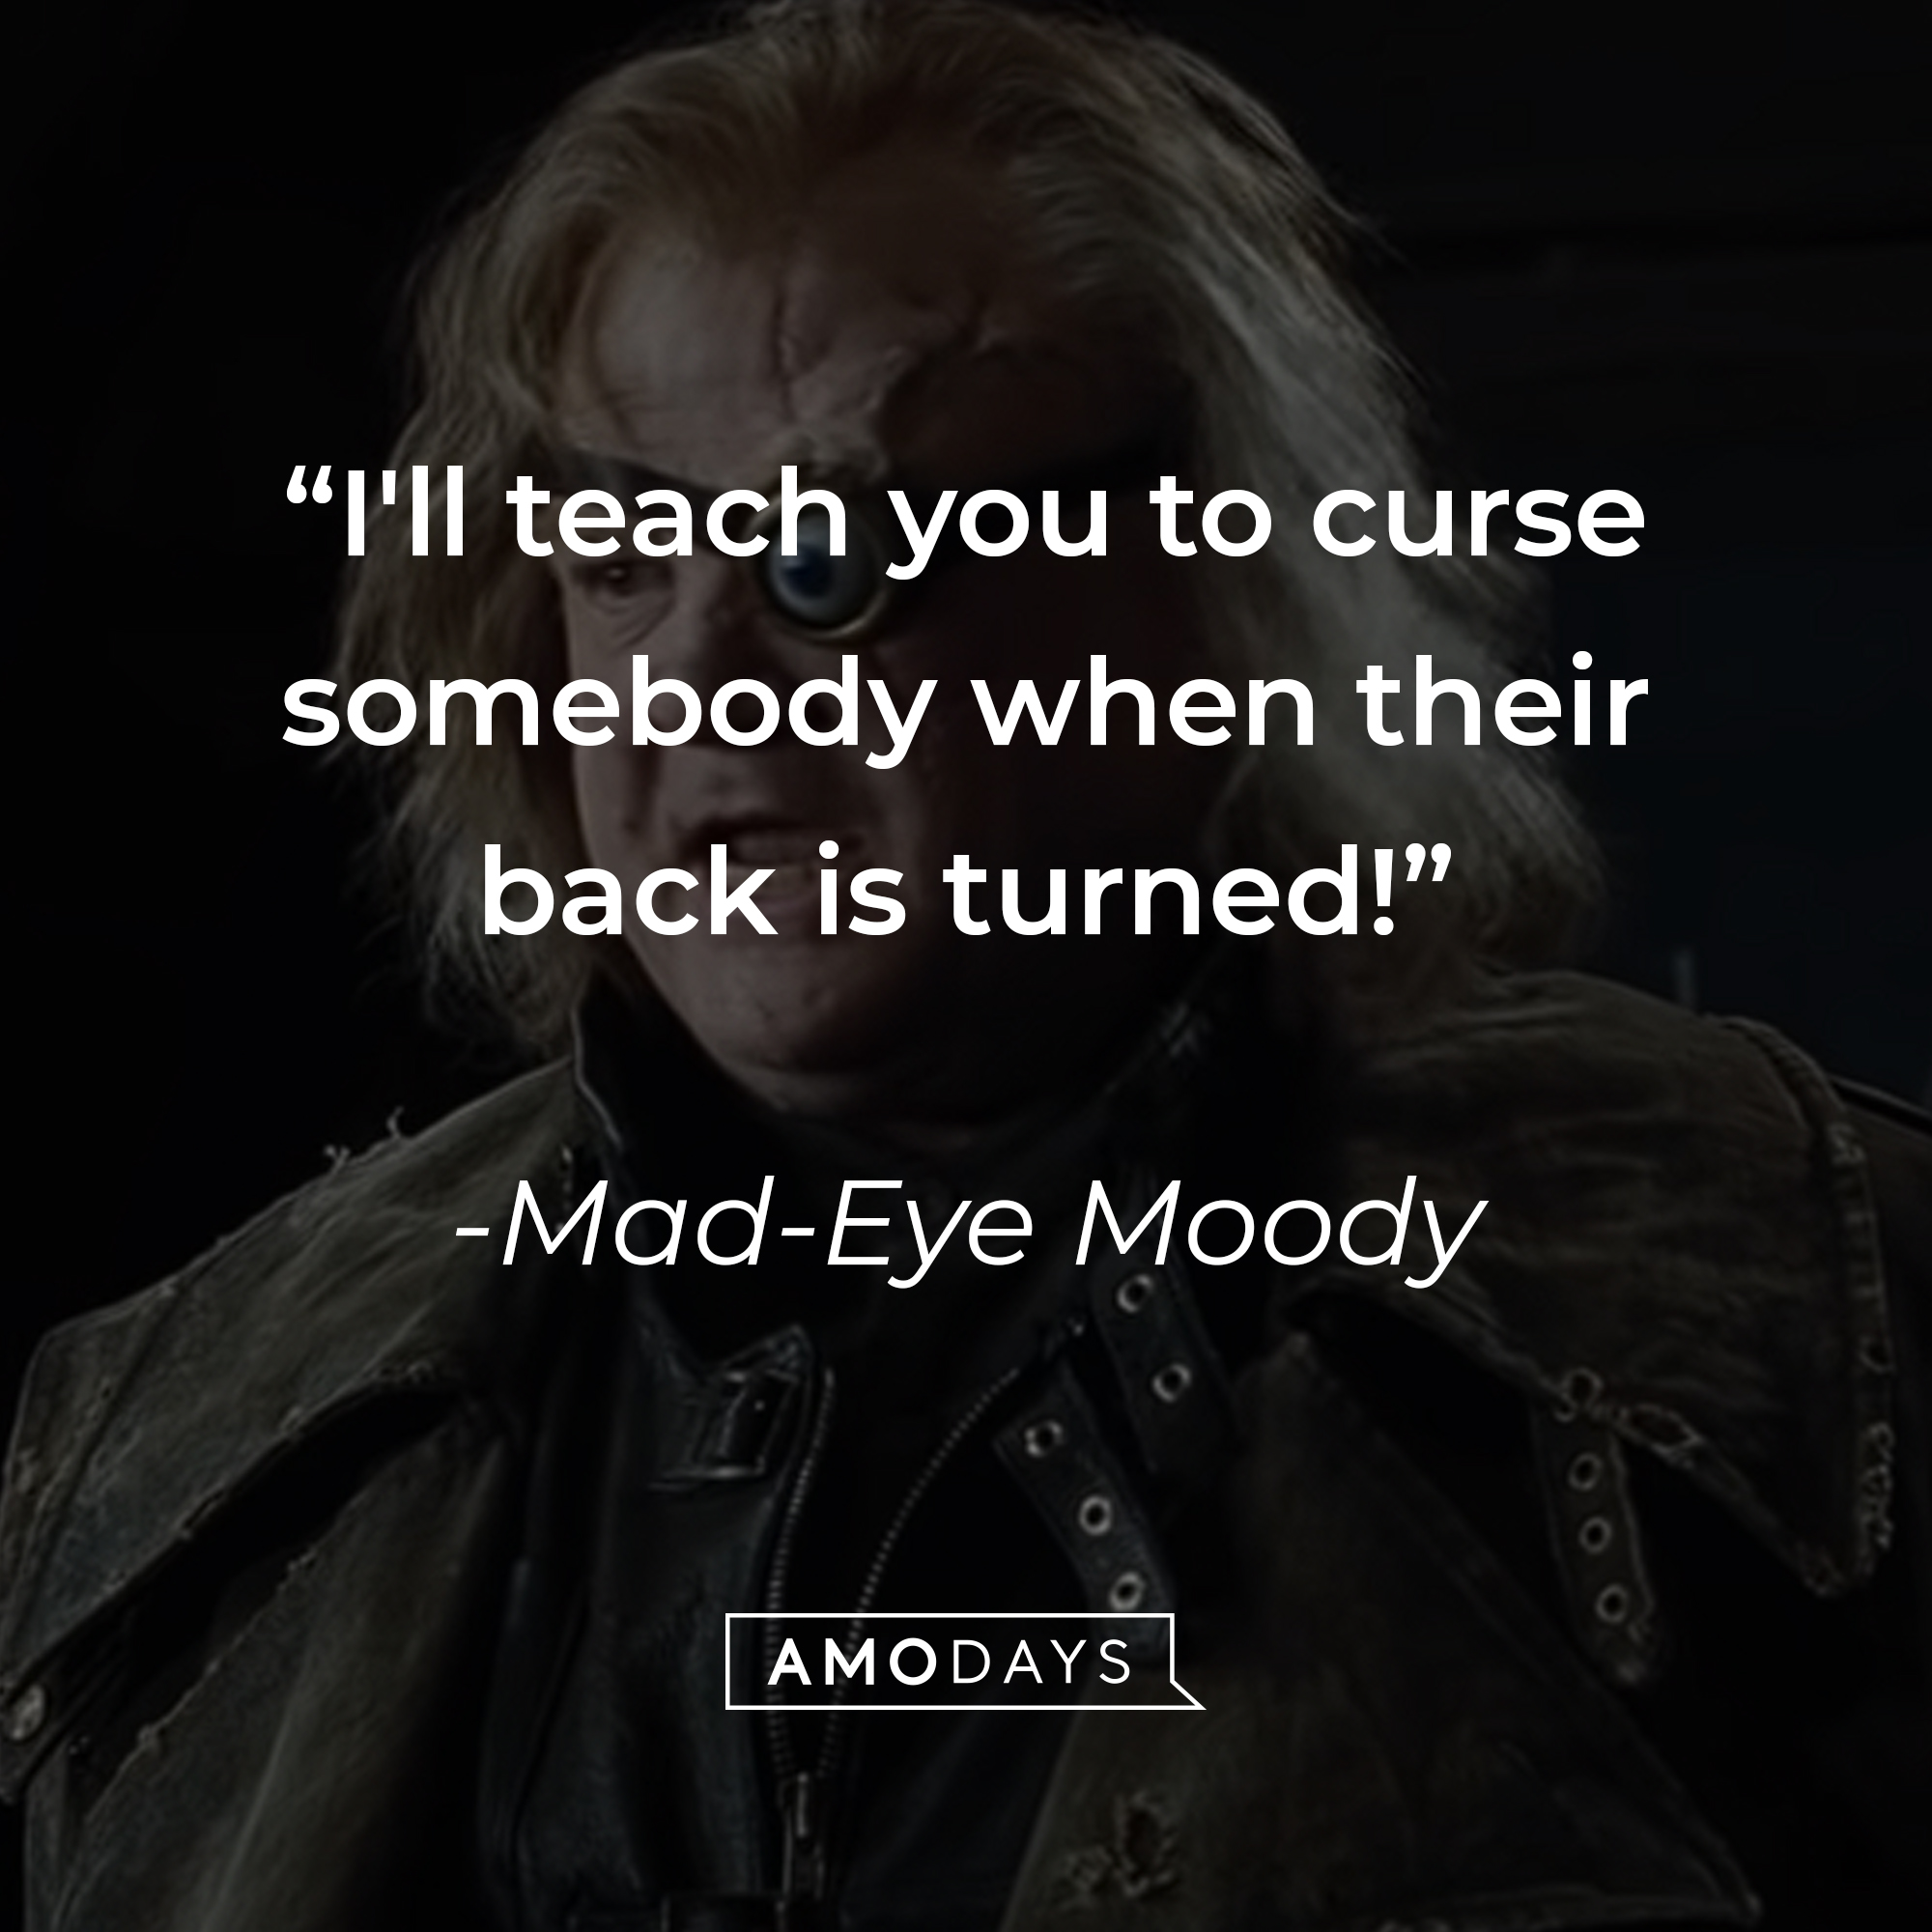 Mad-Eye Moody's quote: "I'll teach you to curse somebody when their back is turned!" | Source: youtube.com/harrypotter